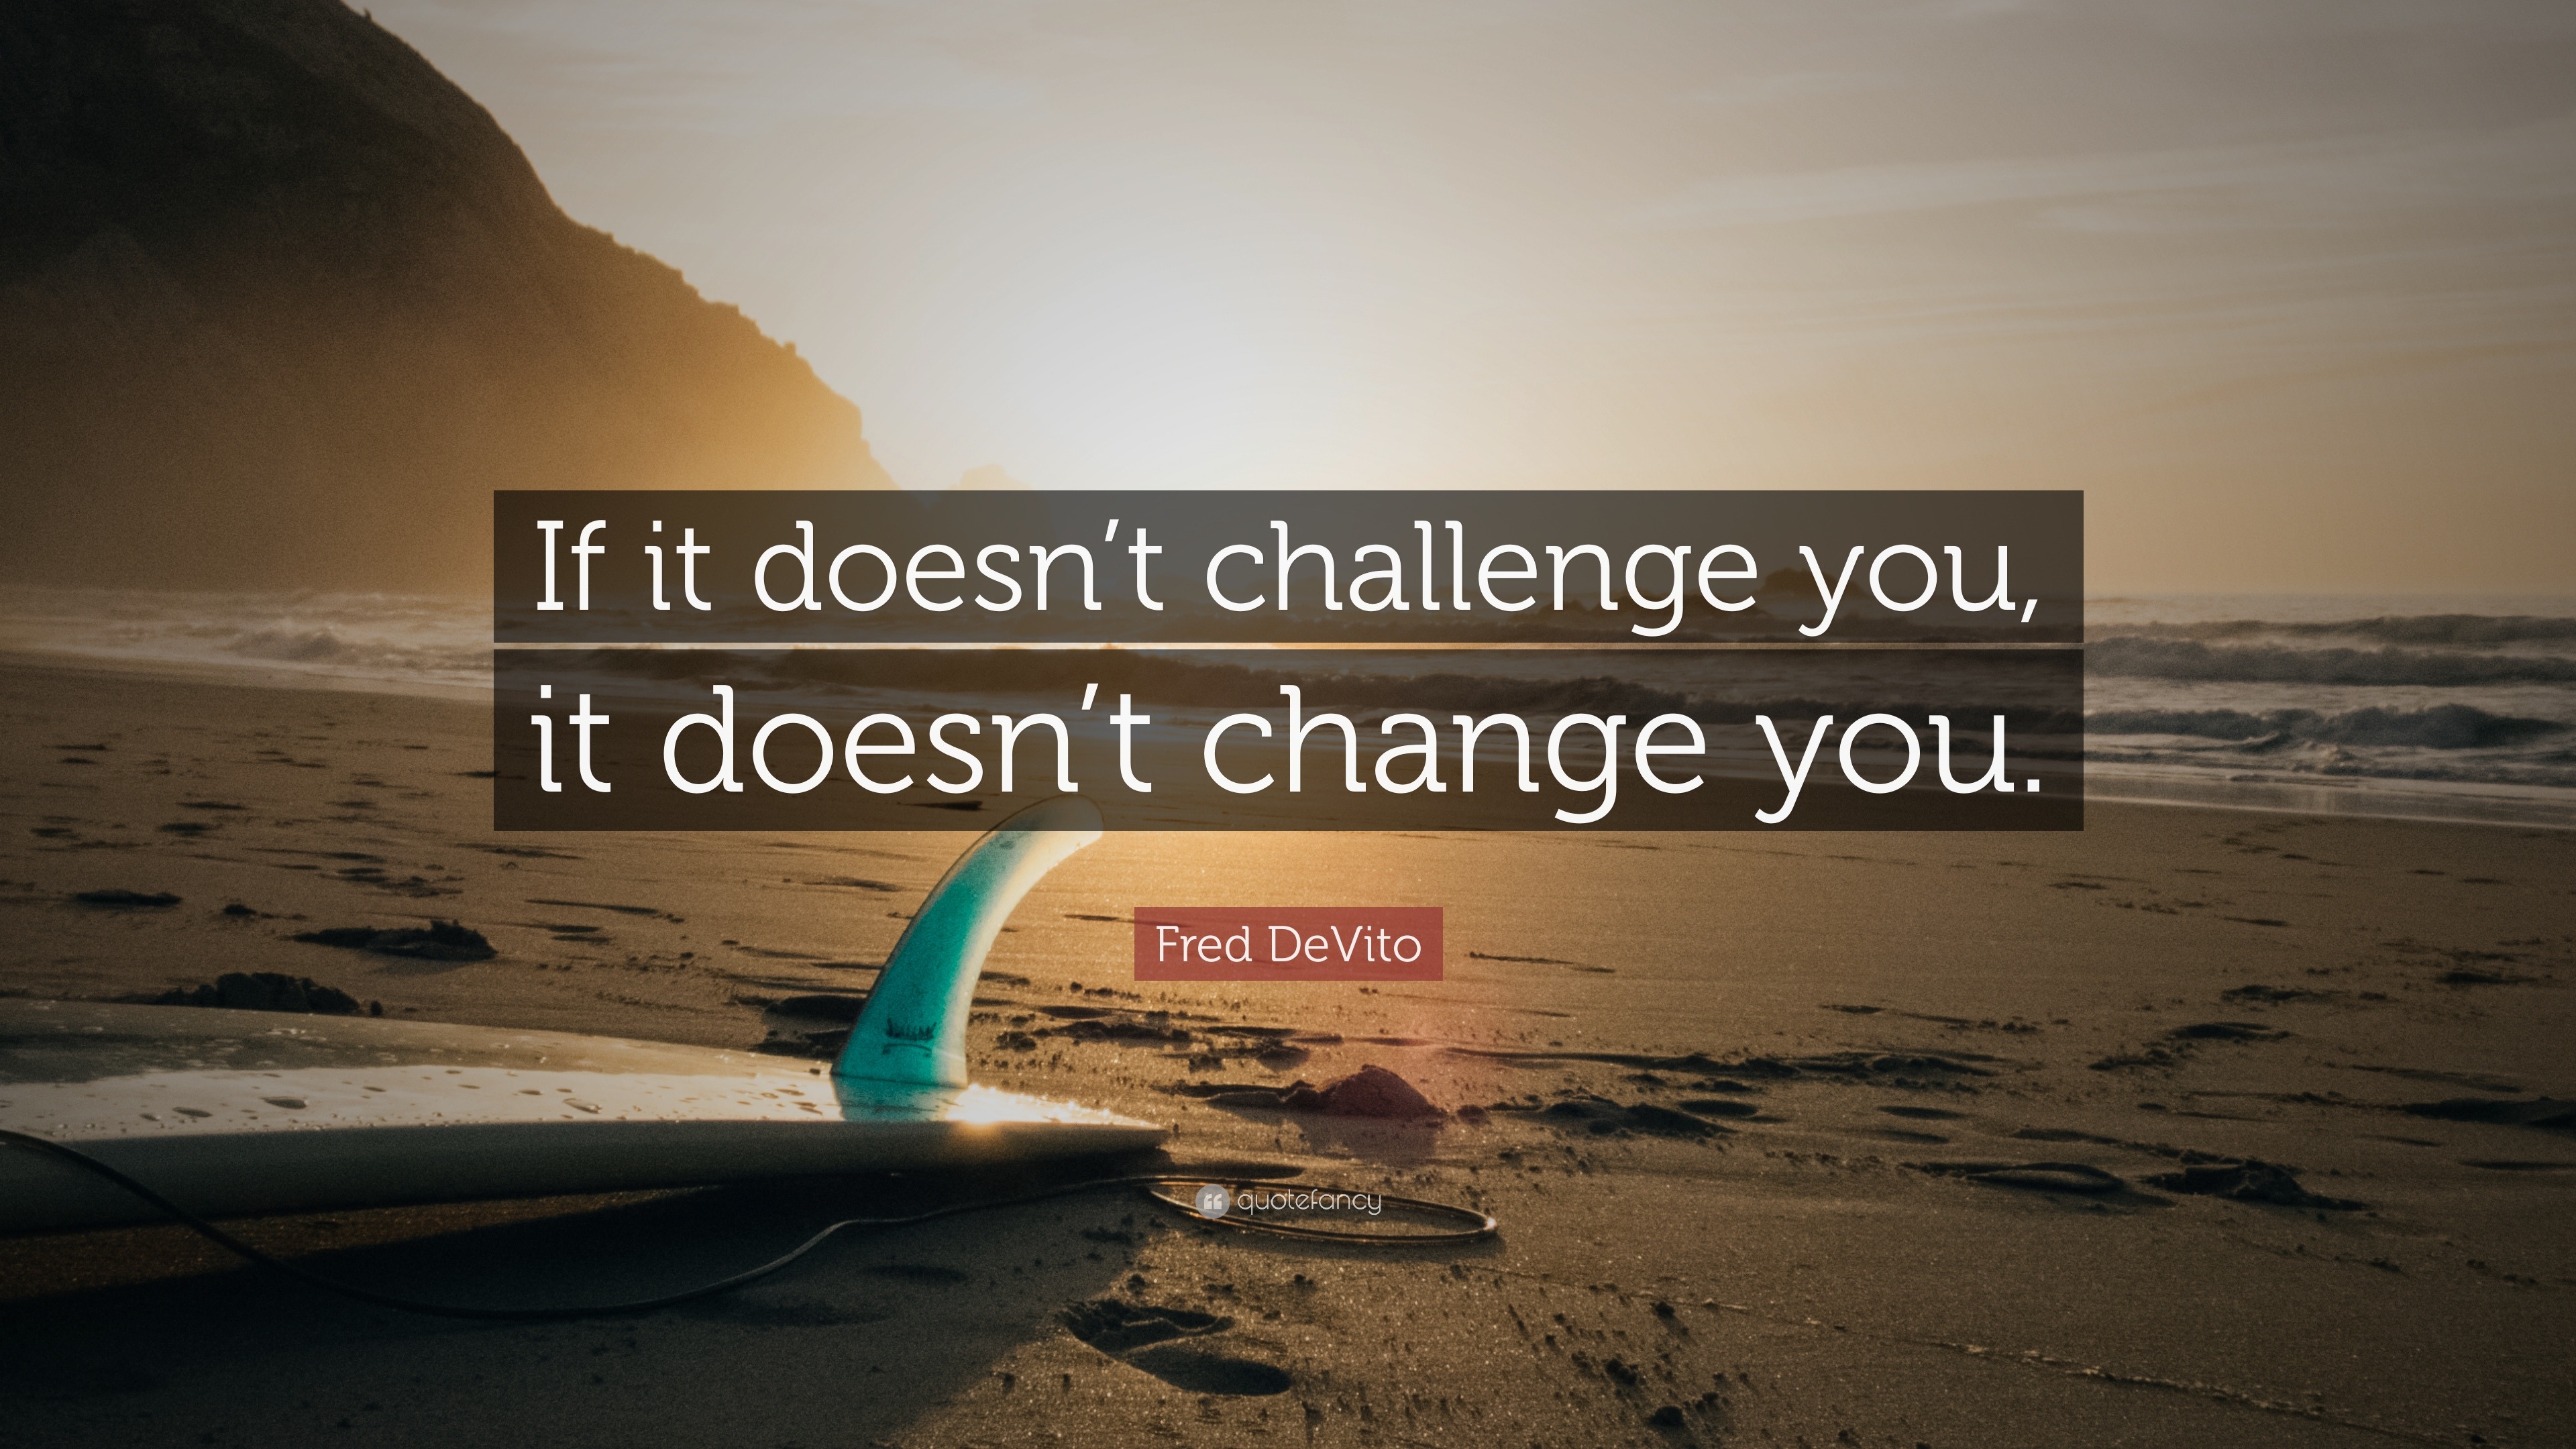 Fred DeVito Quote: “If it doesn’t challenge you, it doesn’t change you.”